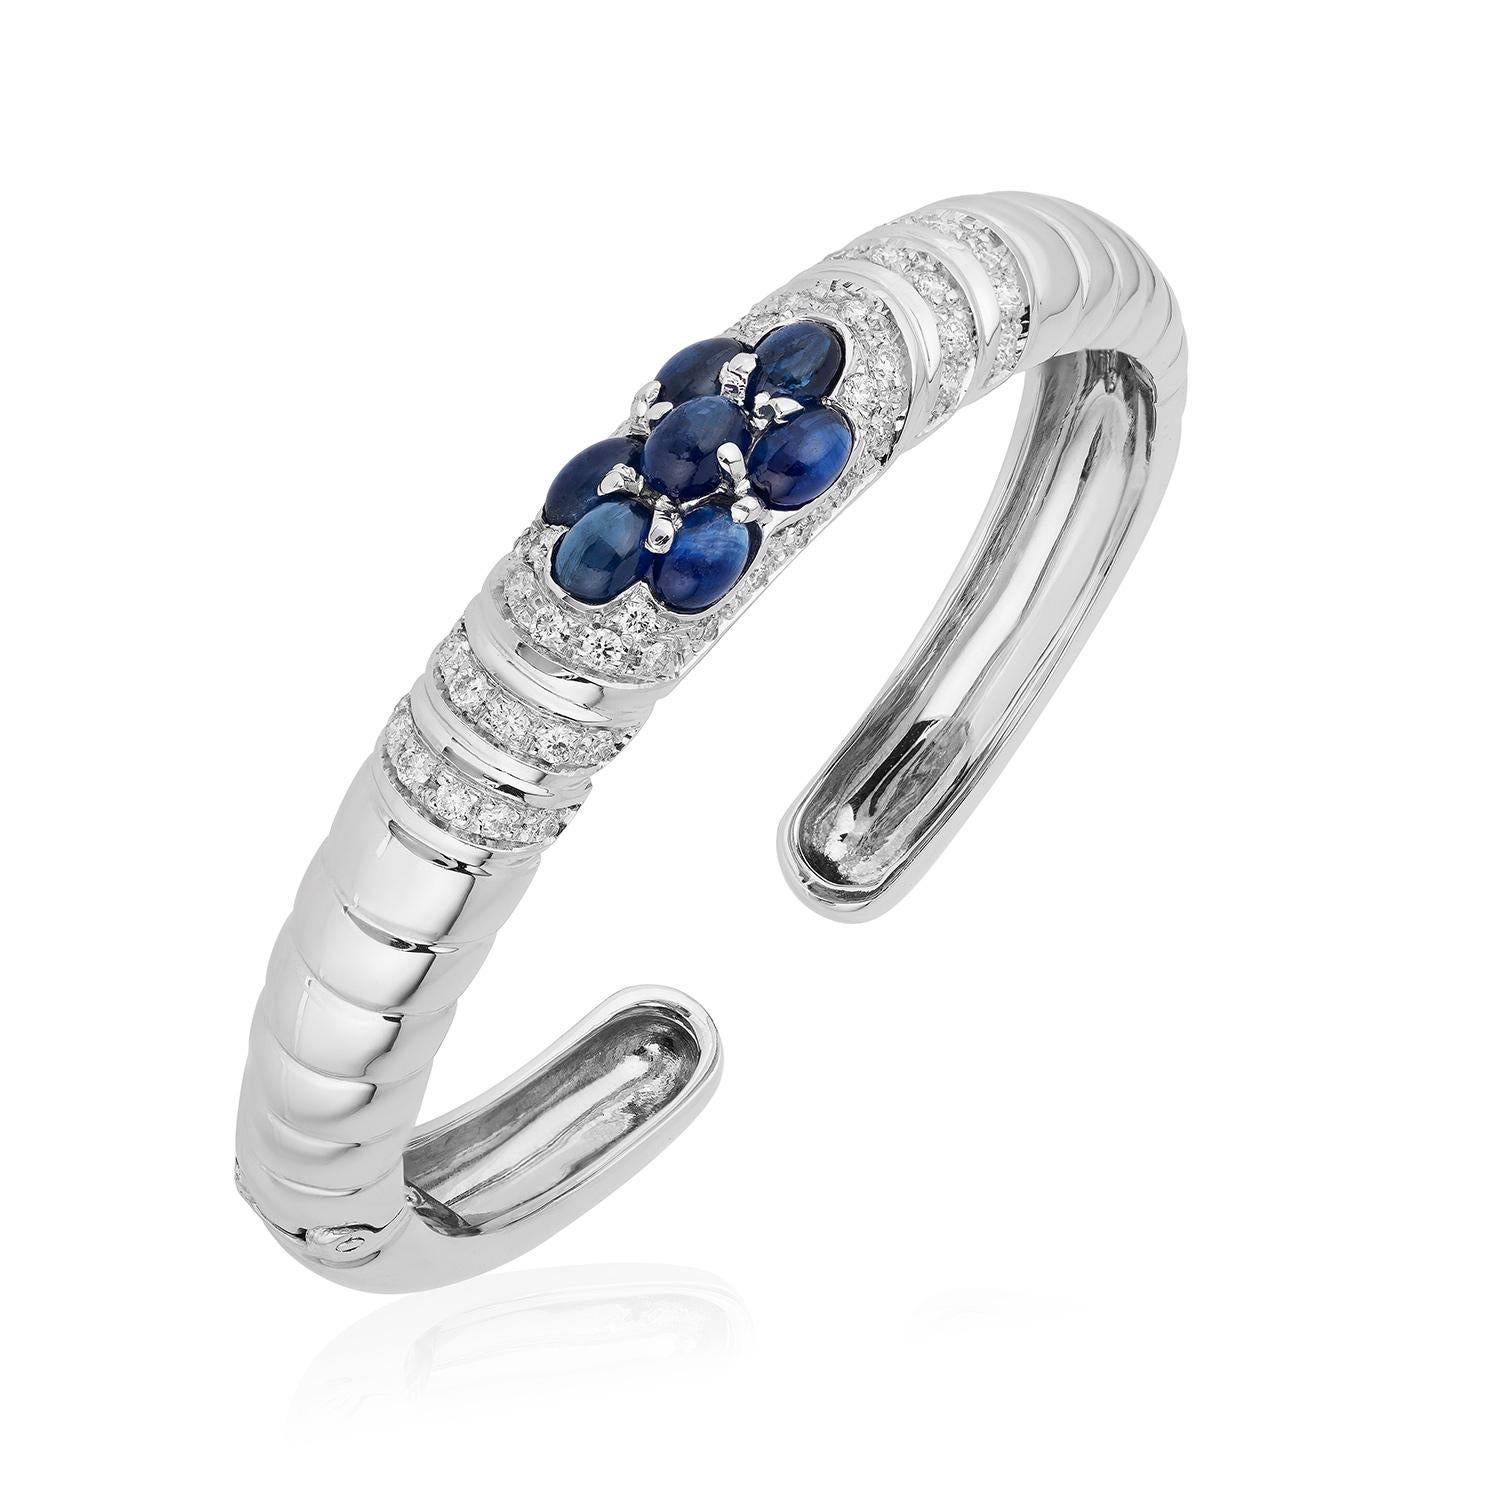 Andreoli Diamond Blue Sapphire Cabochon 18 Karat White Gold Bracelet

This bracelet features:
- 1.19 Carat Diamond
- 5.68 Carat Blue Sapphire Cabochon
- 41.90 Gram 18K White Gold
- Made In Italy